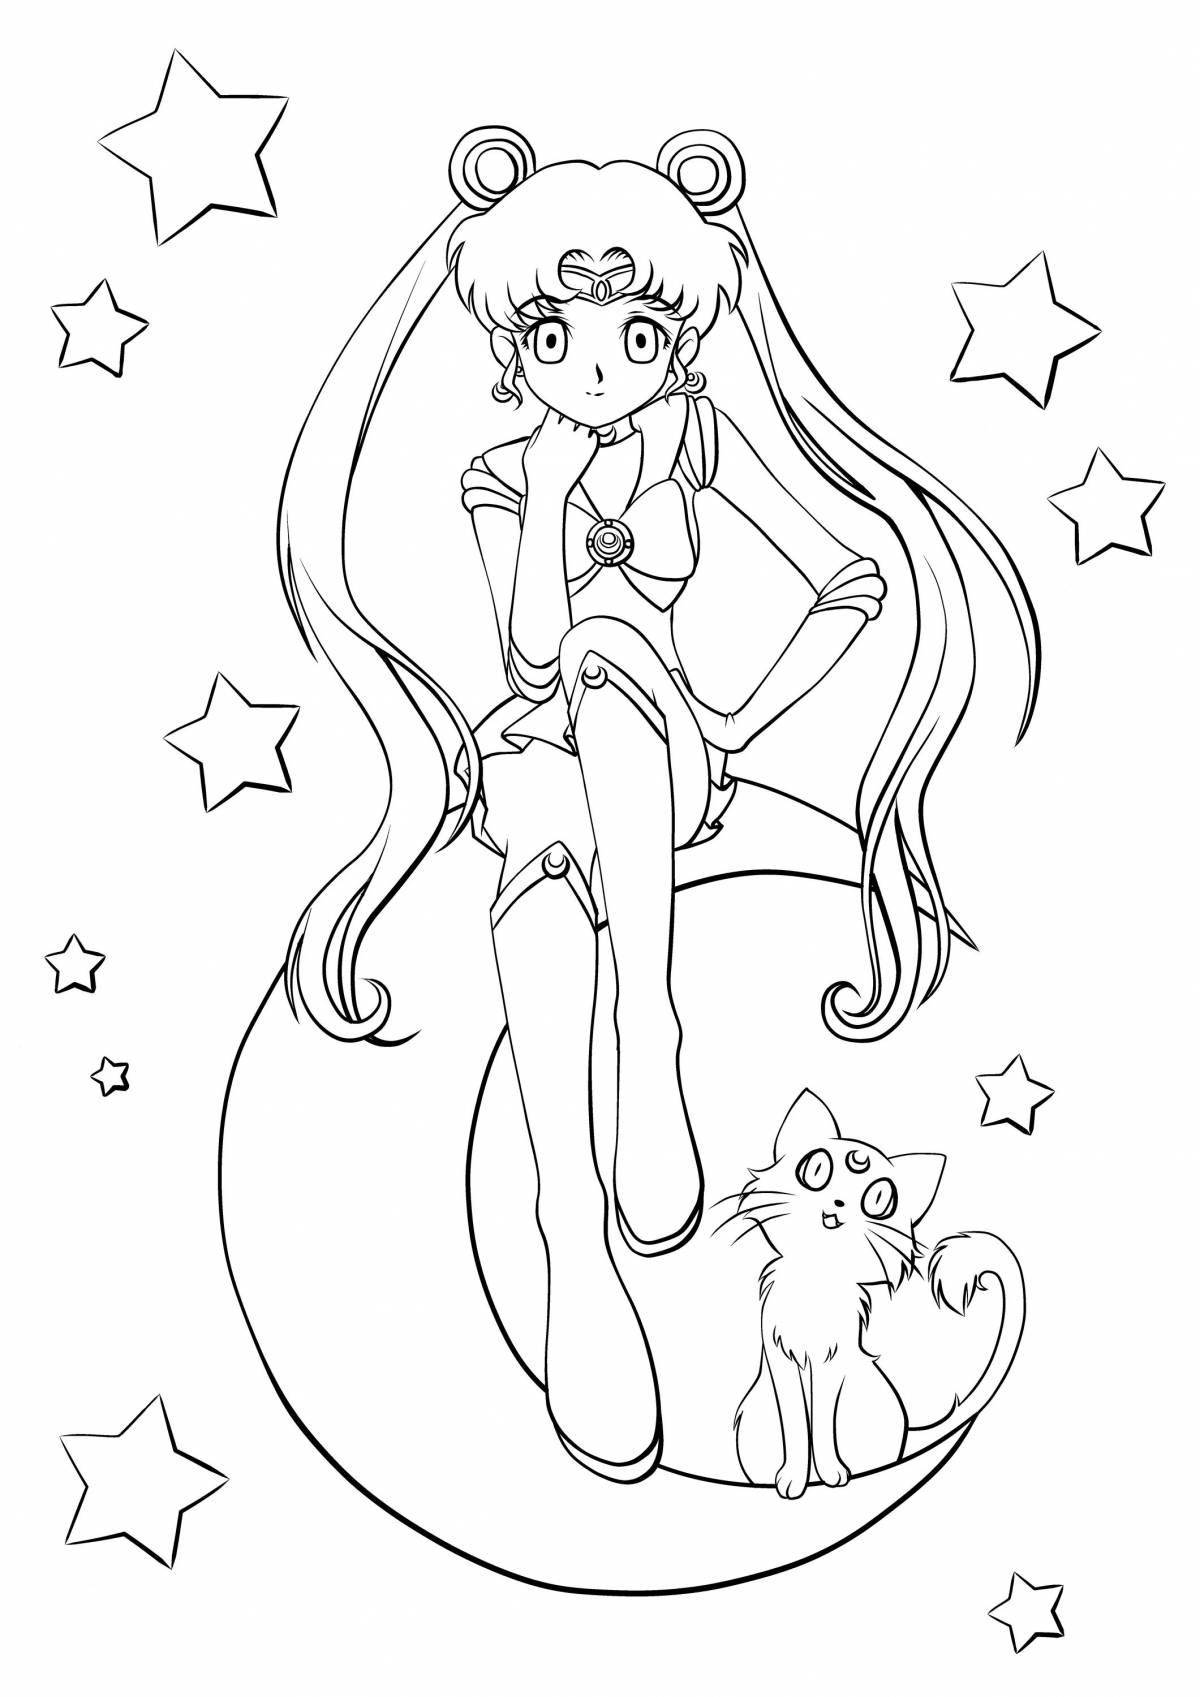 Fairy tale coloring moon cat